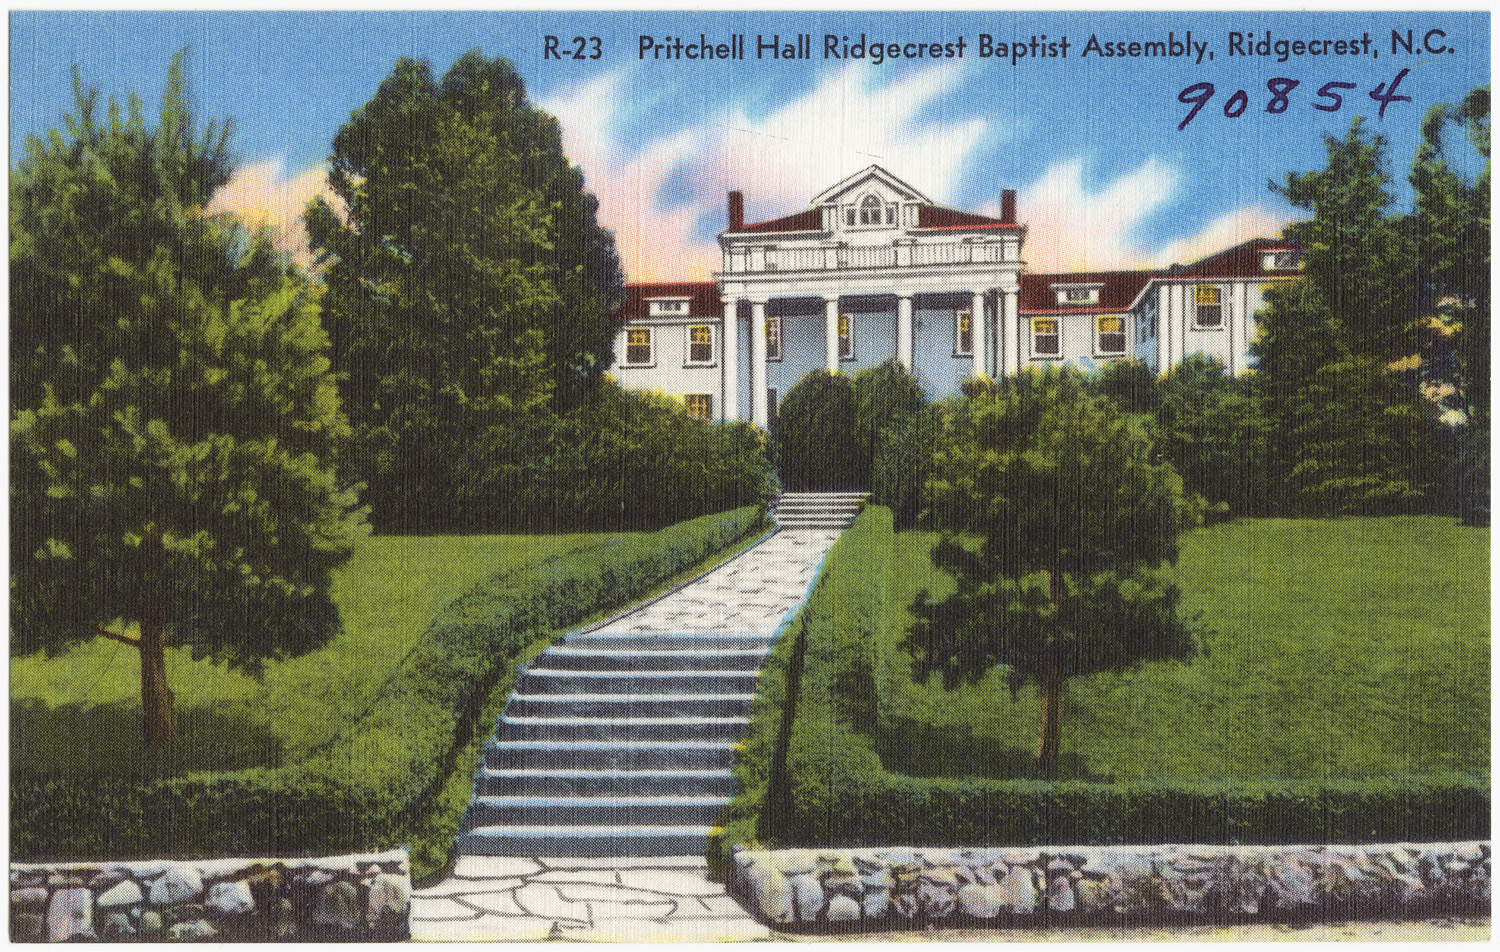 the old postcard features a painting of a long staircase leading to the building